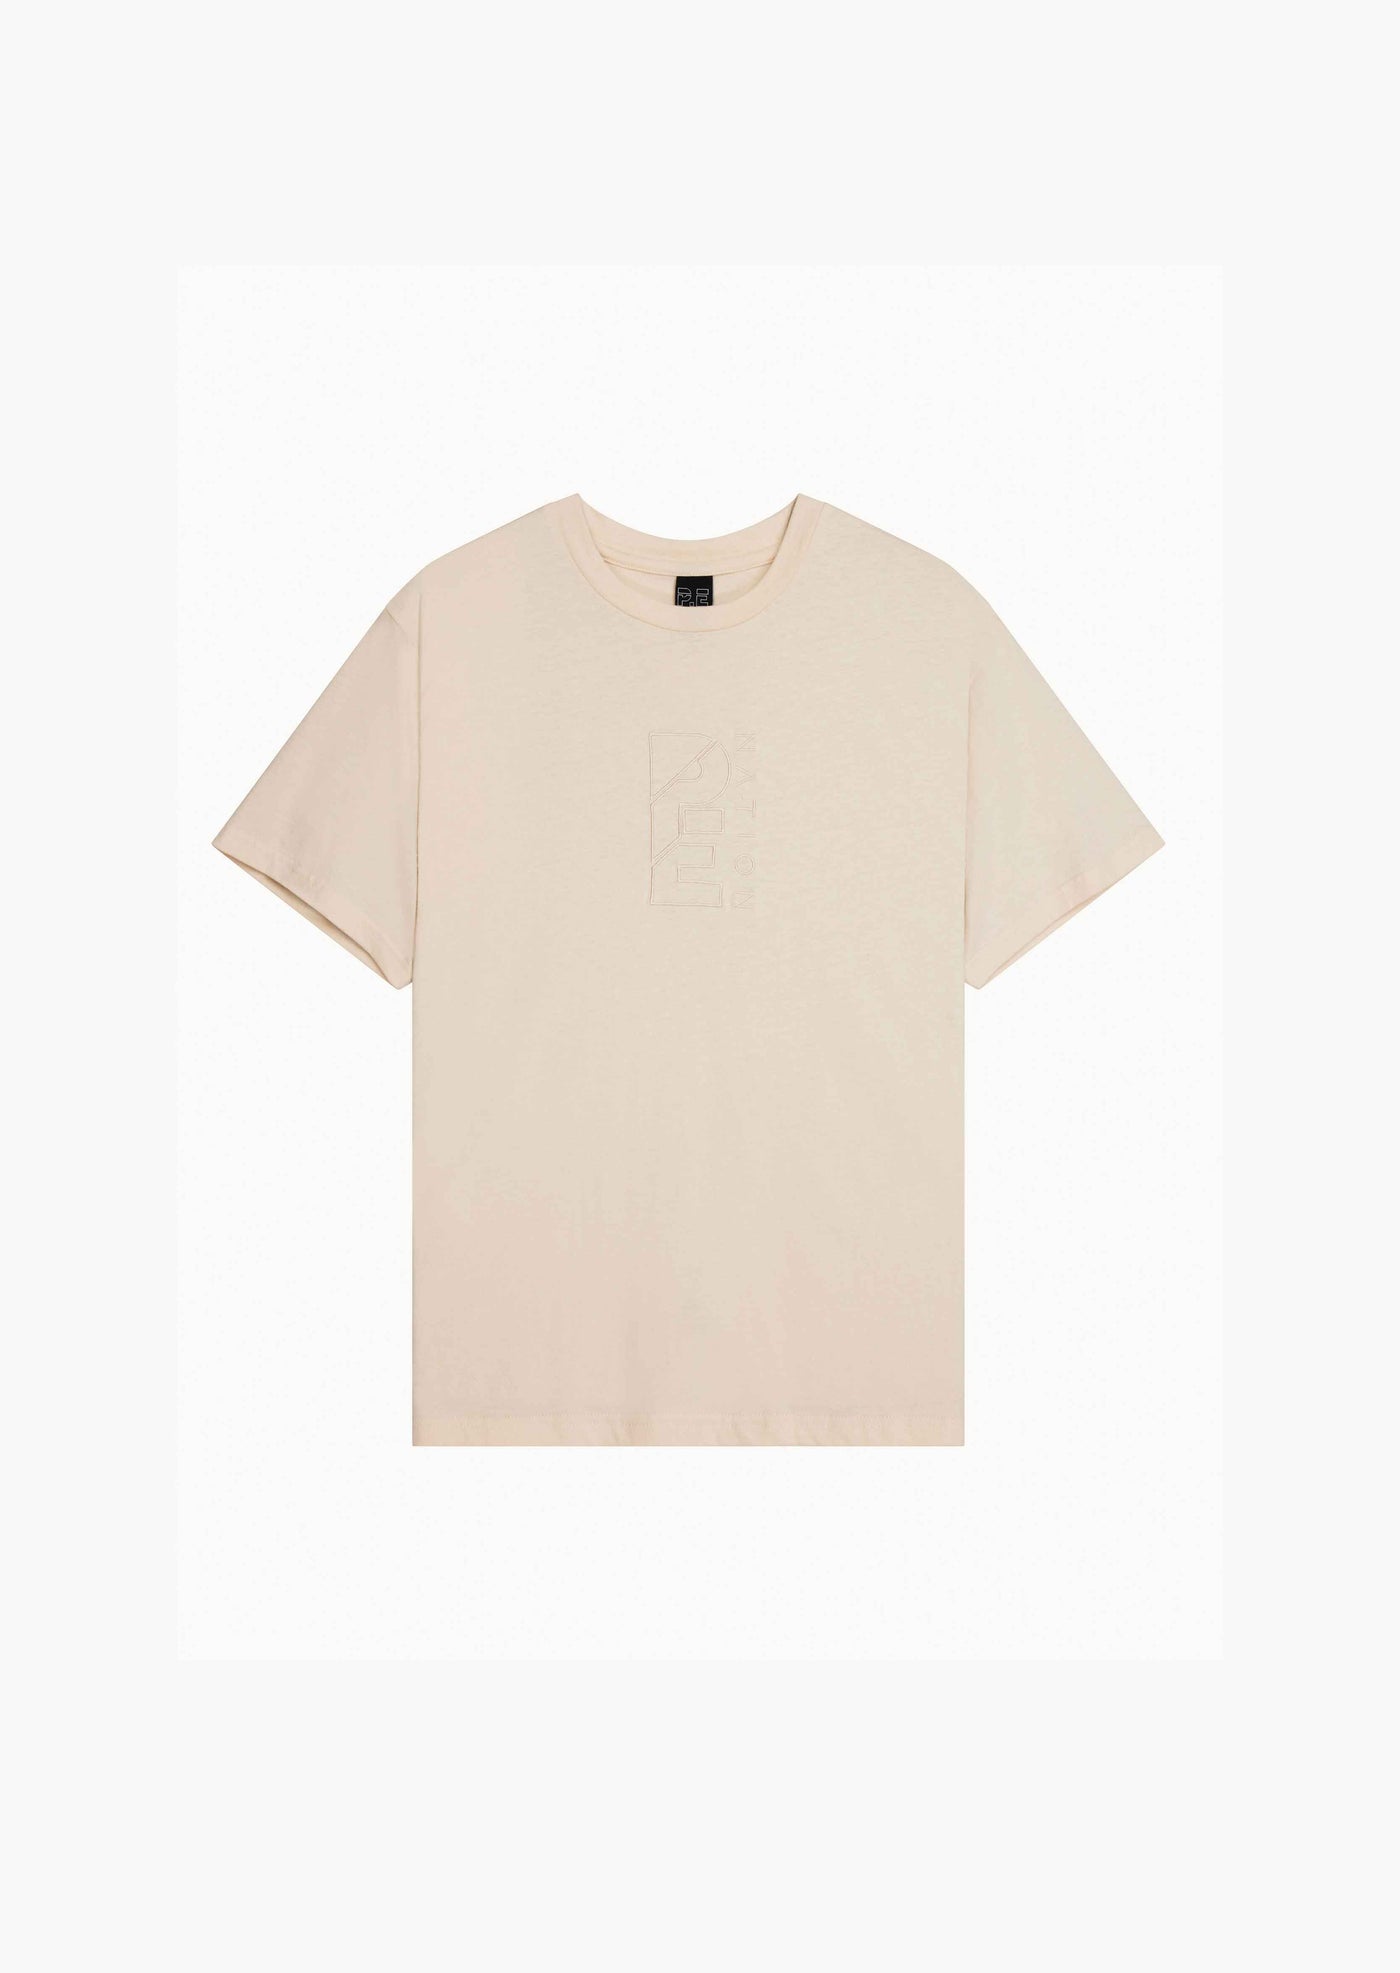 AUGUSTA TEE IN PEARLED IVORY